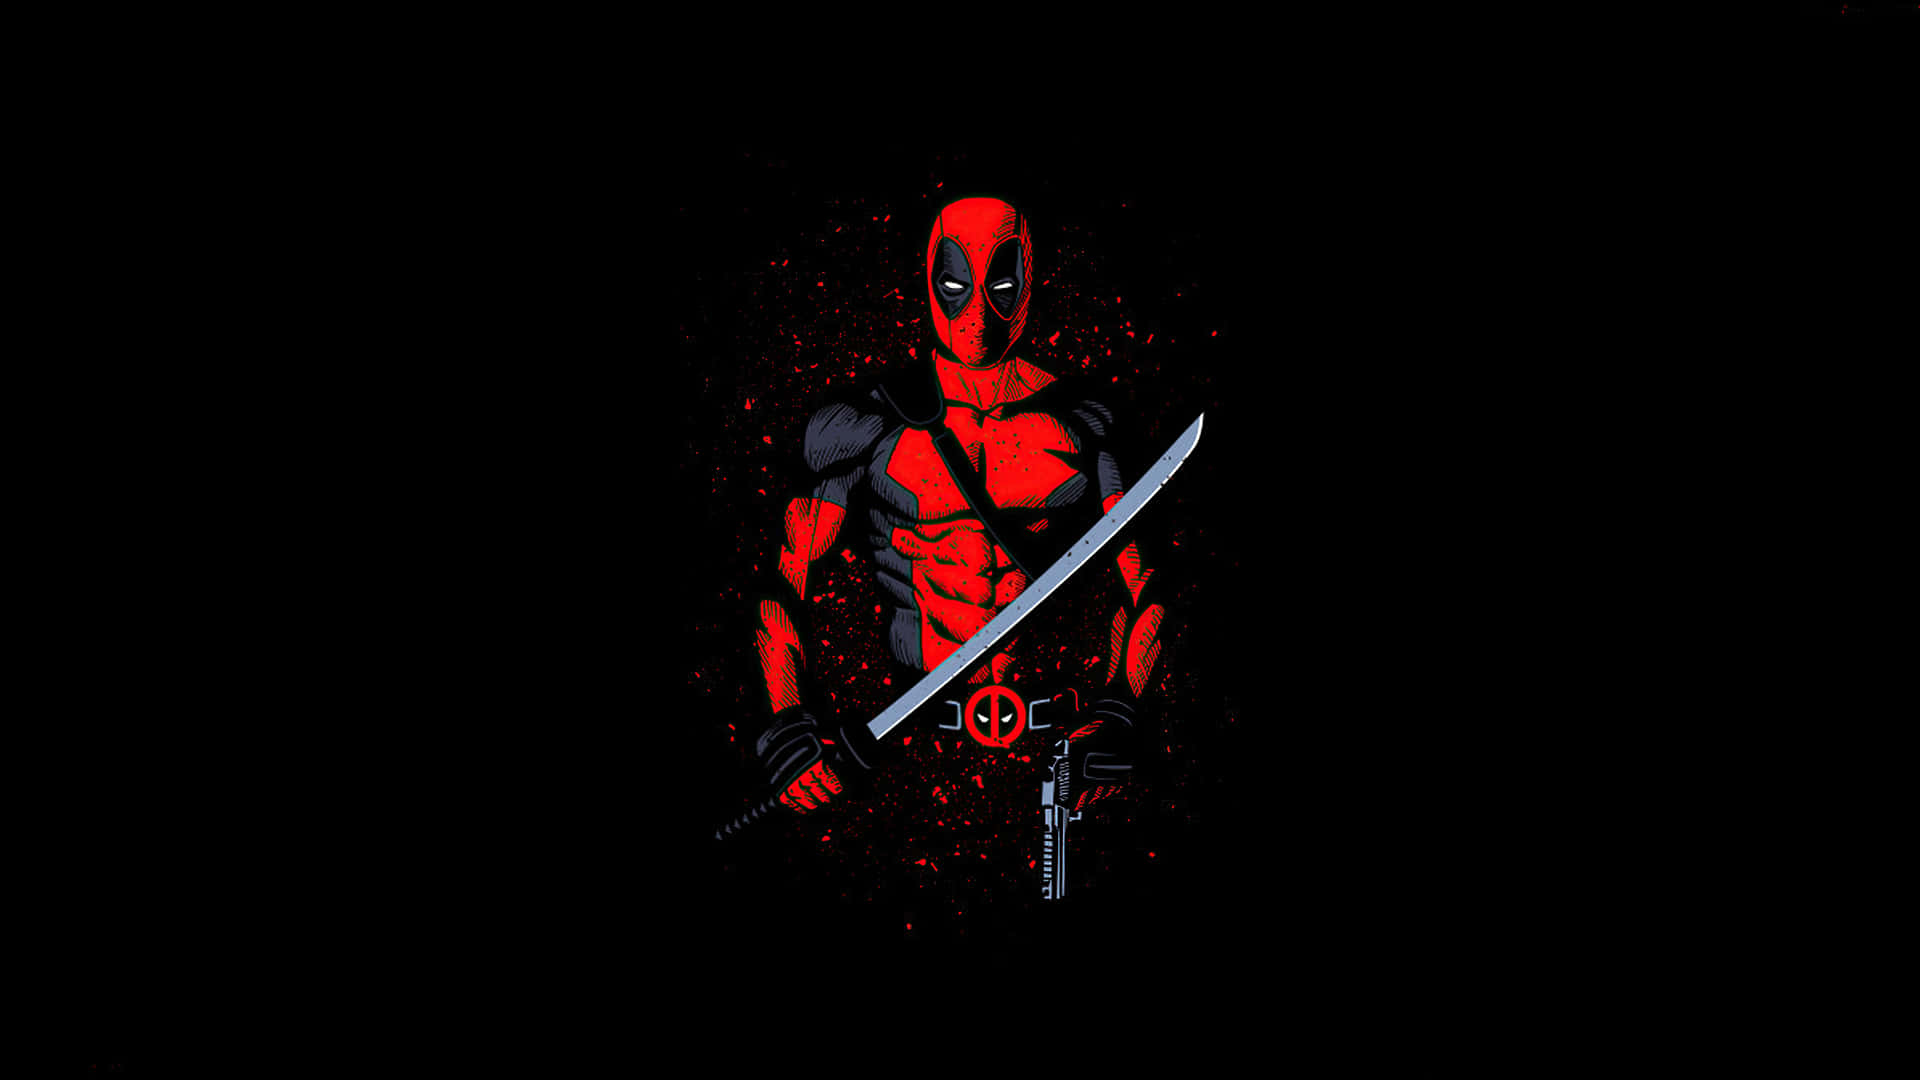 Deadpool in black suit, sleuthing his way through town Wallpaper